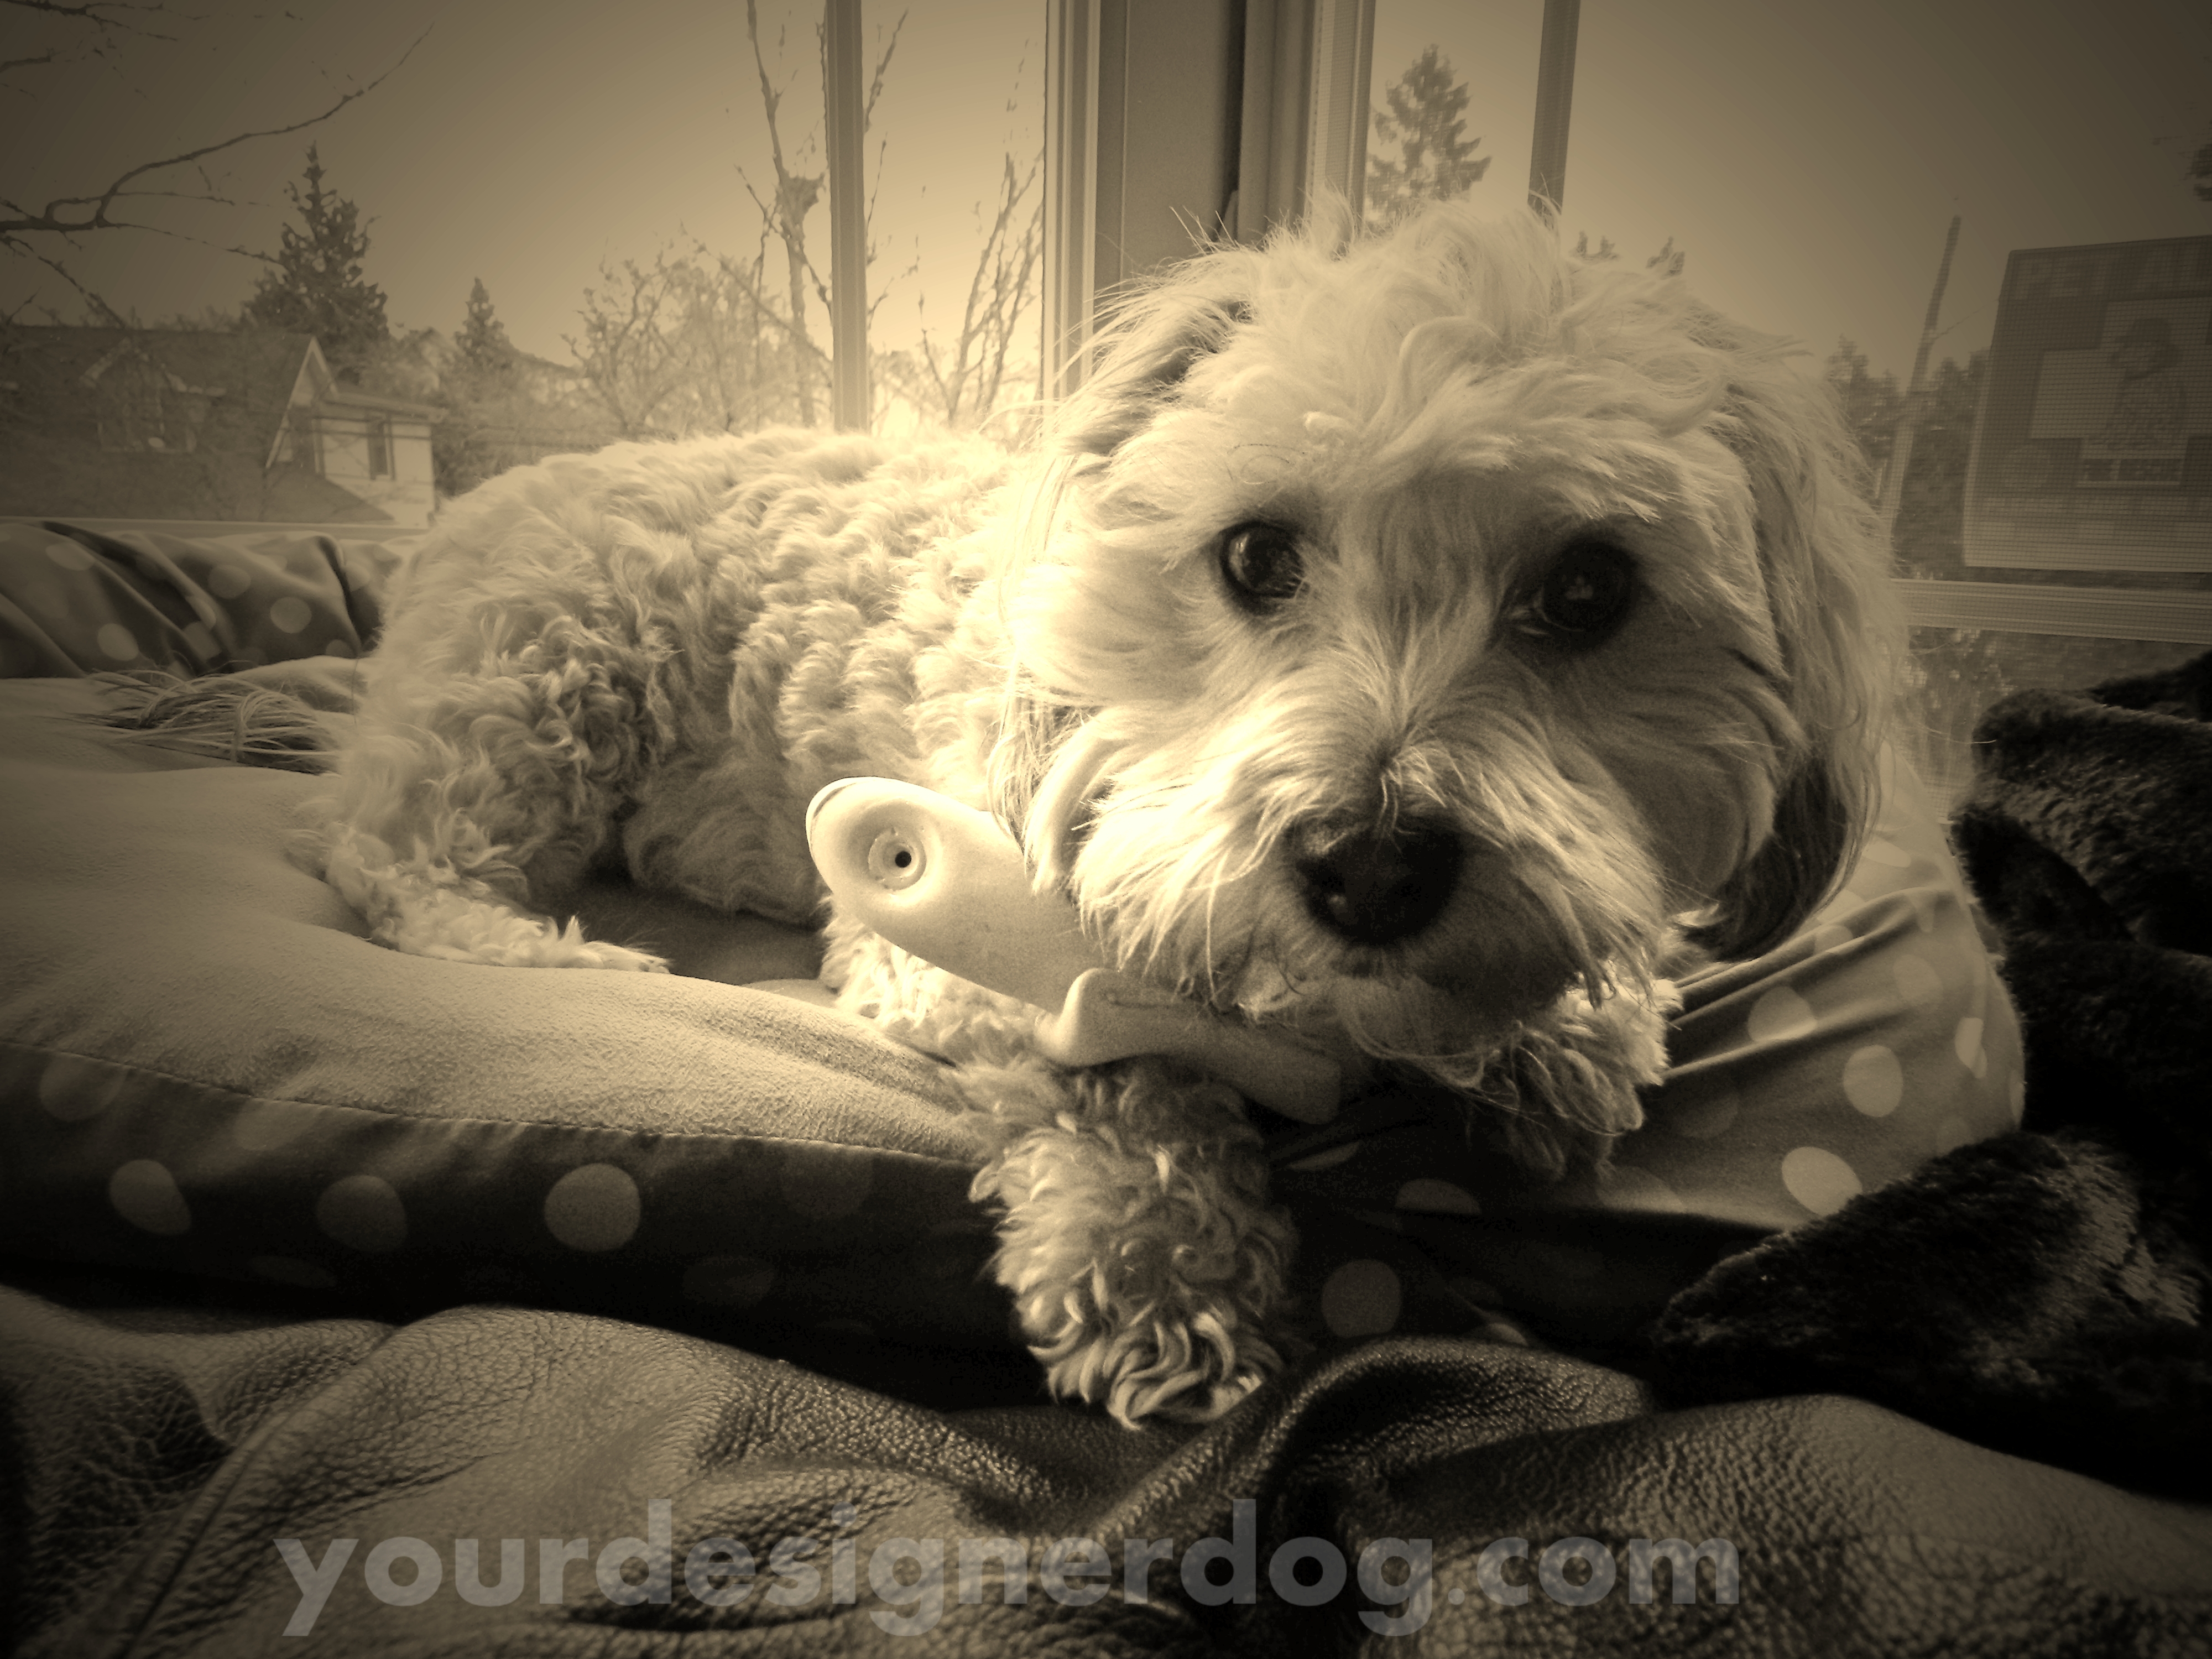 dogs, designer dogs, yorkipoo, yorkie poo, doggy in the window, sepia photography, banana